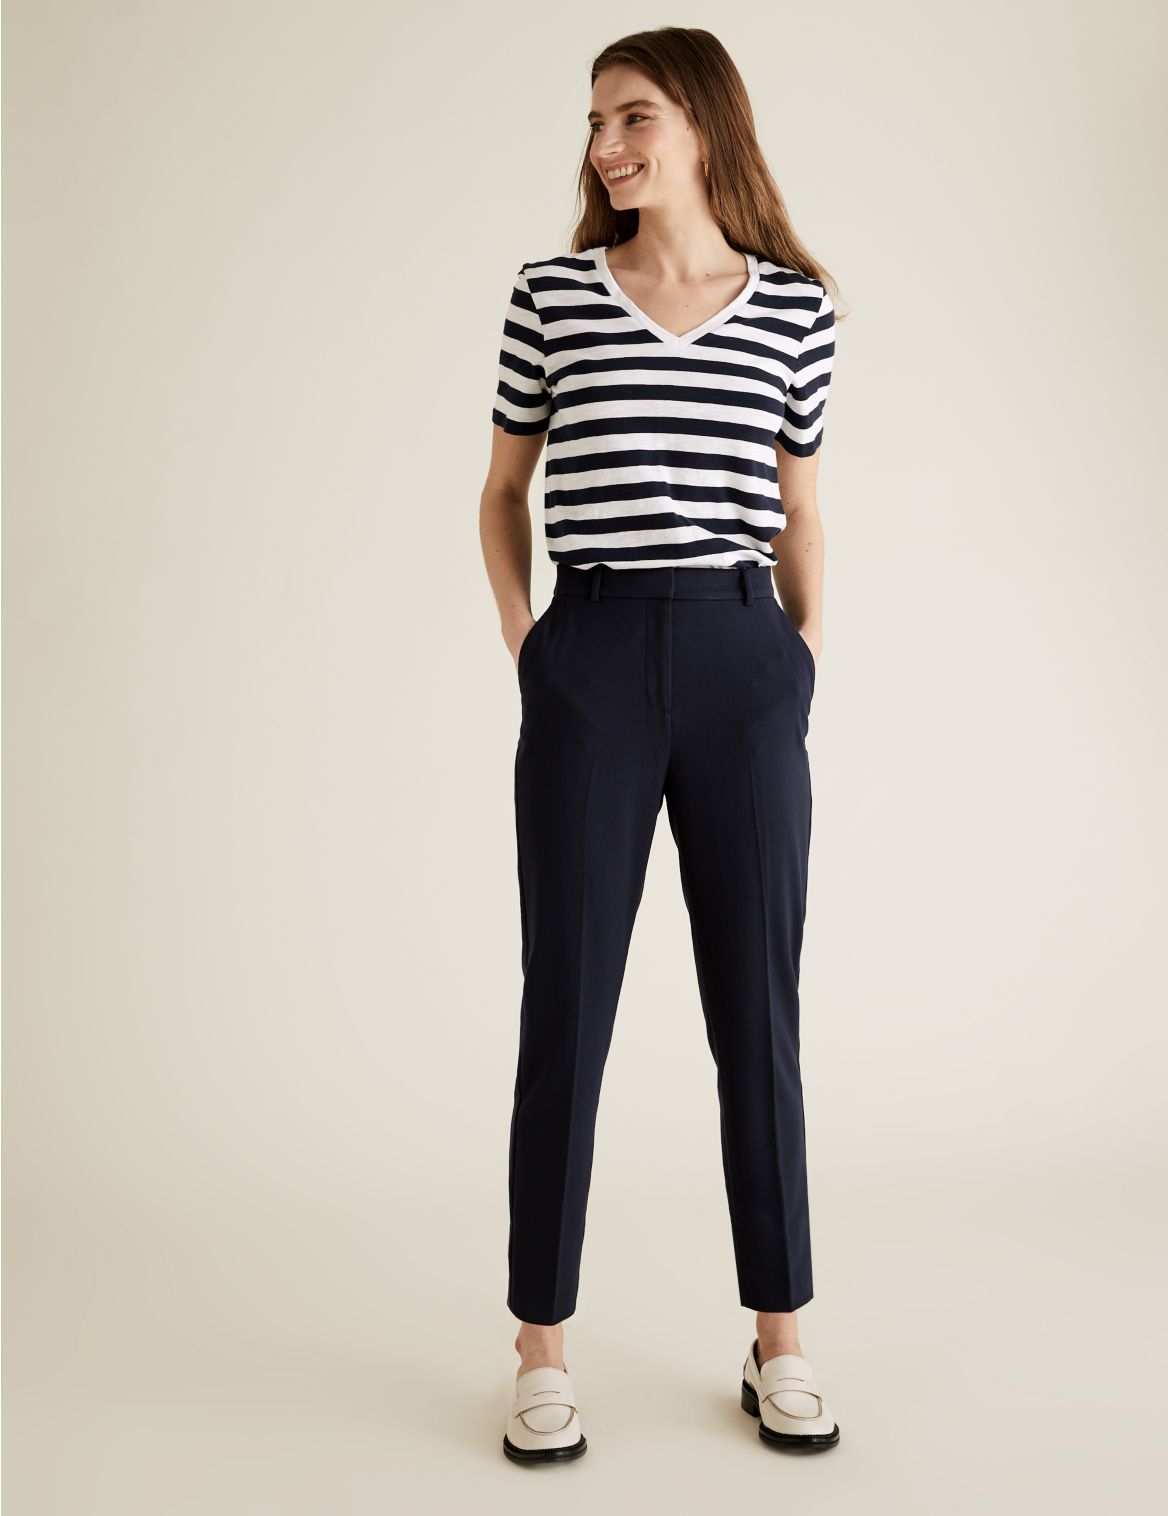 PETITE Slim Fit Ankle Grazer Trousers navy